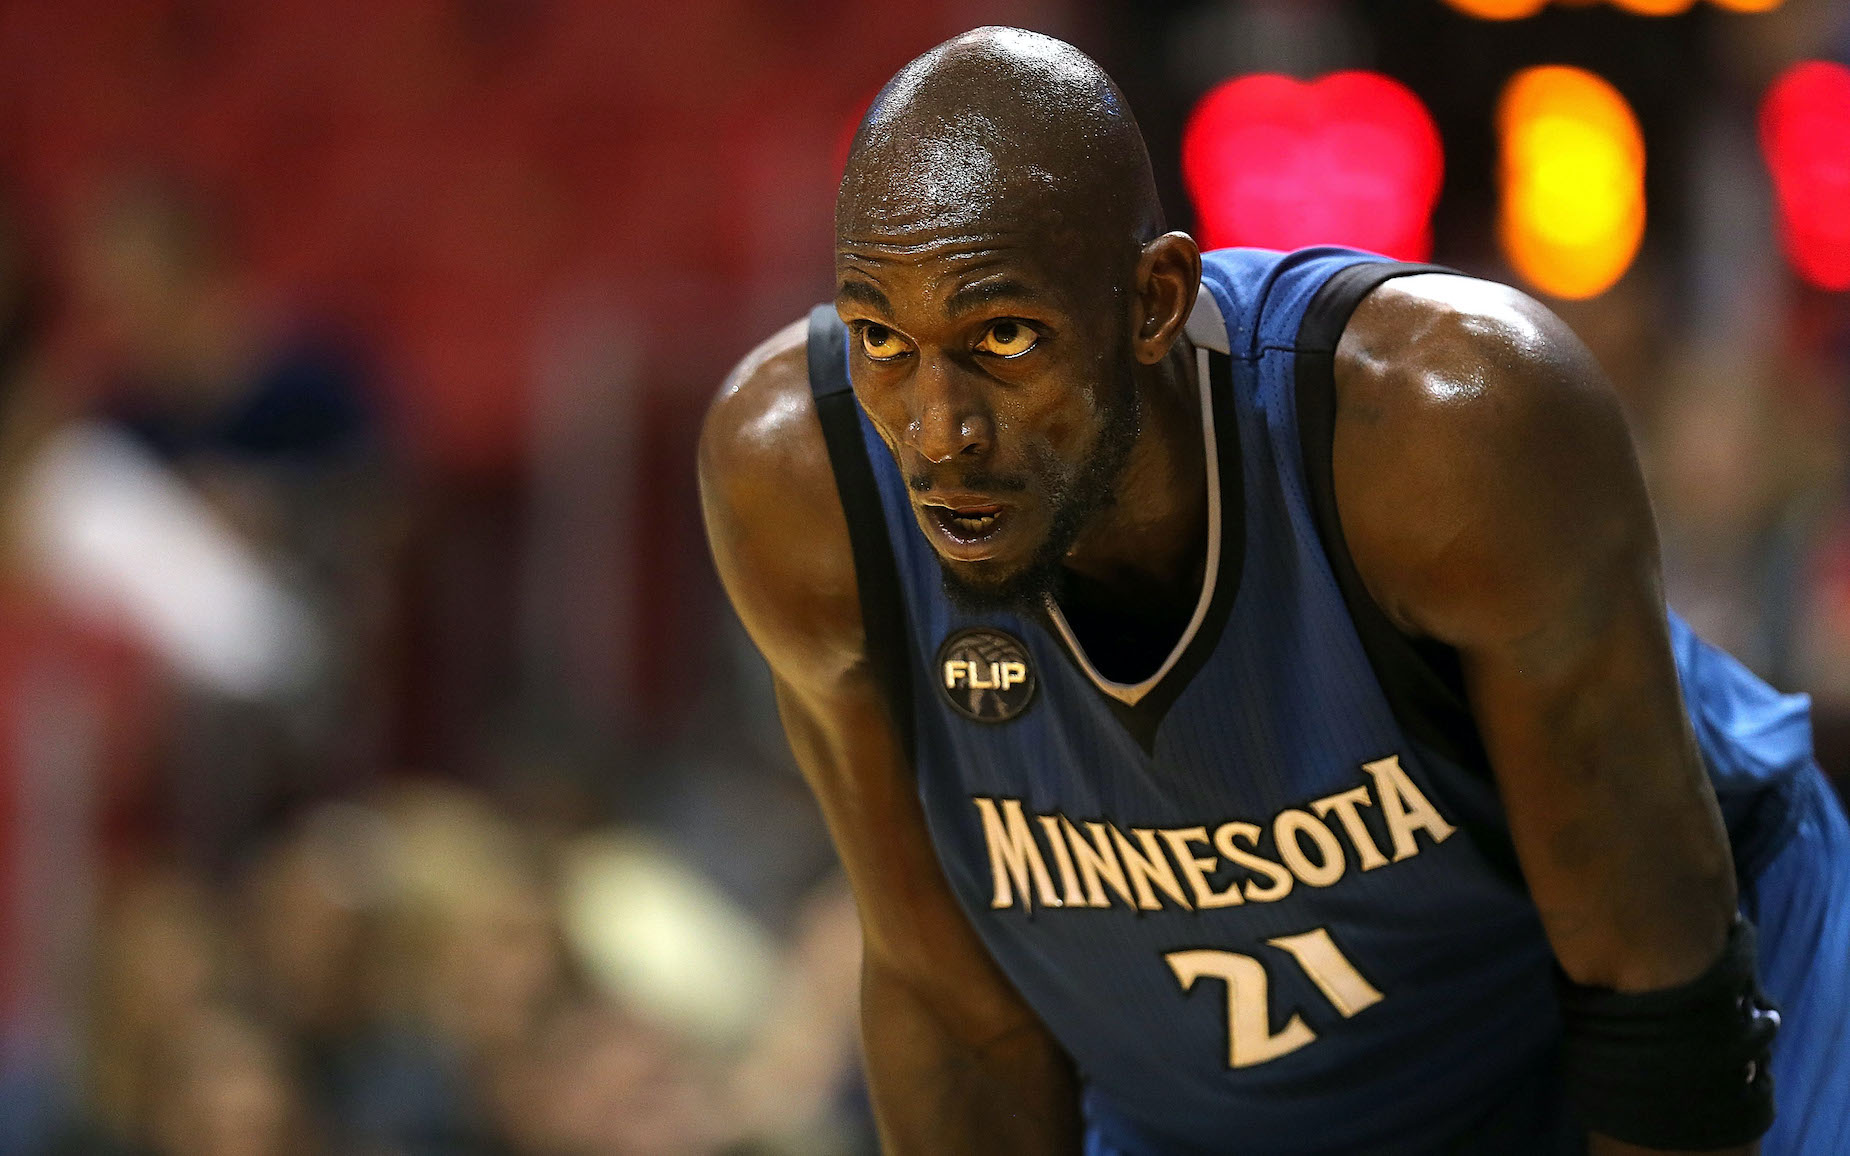 Kevin Garnett Revealed the ‘Only Regret’ of His Hall of Fame NBA Career and It Involves a Team Other Than the Timberwolves